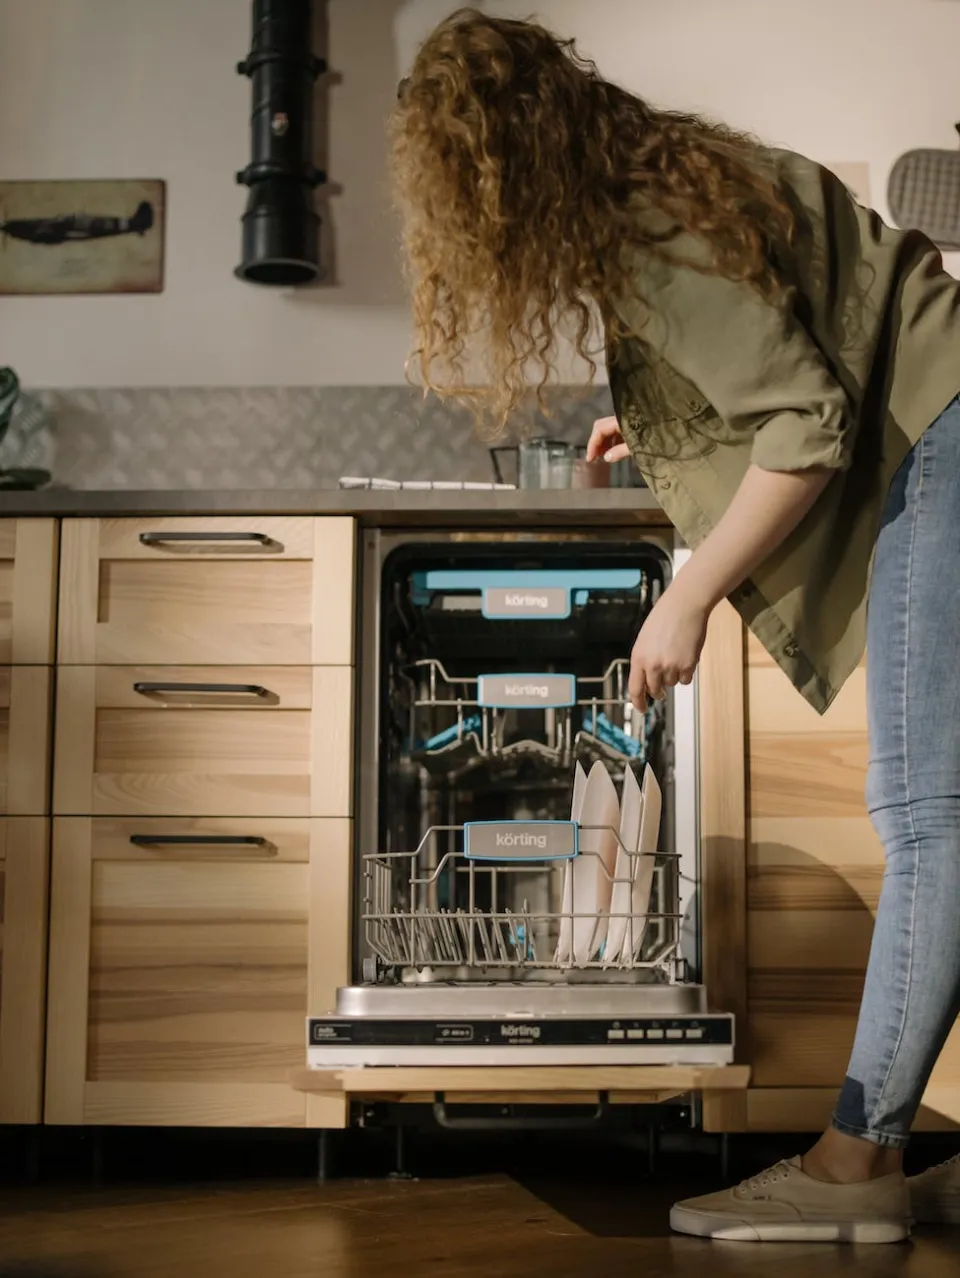 How Much Does a Dishwasher Cost? Let's See